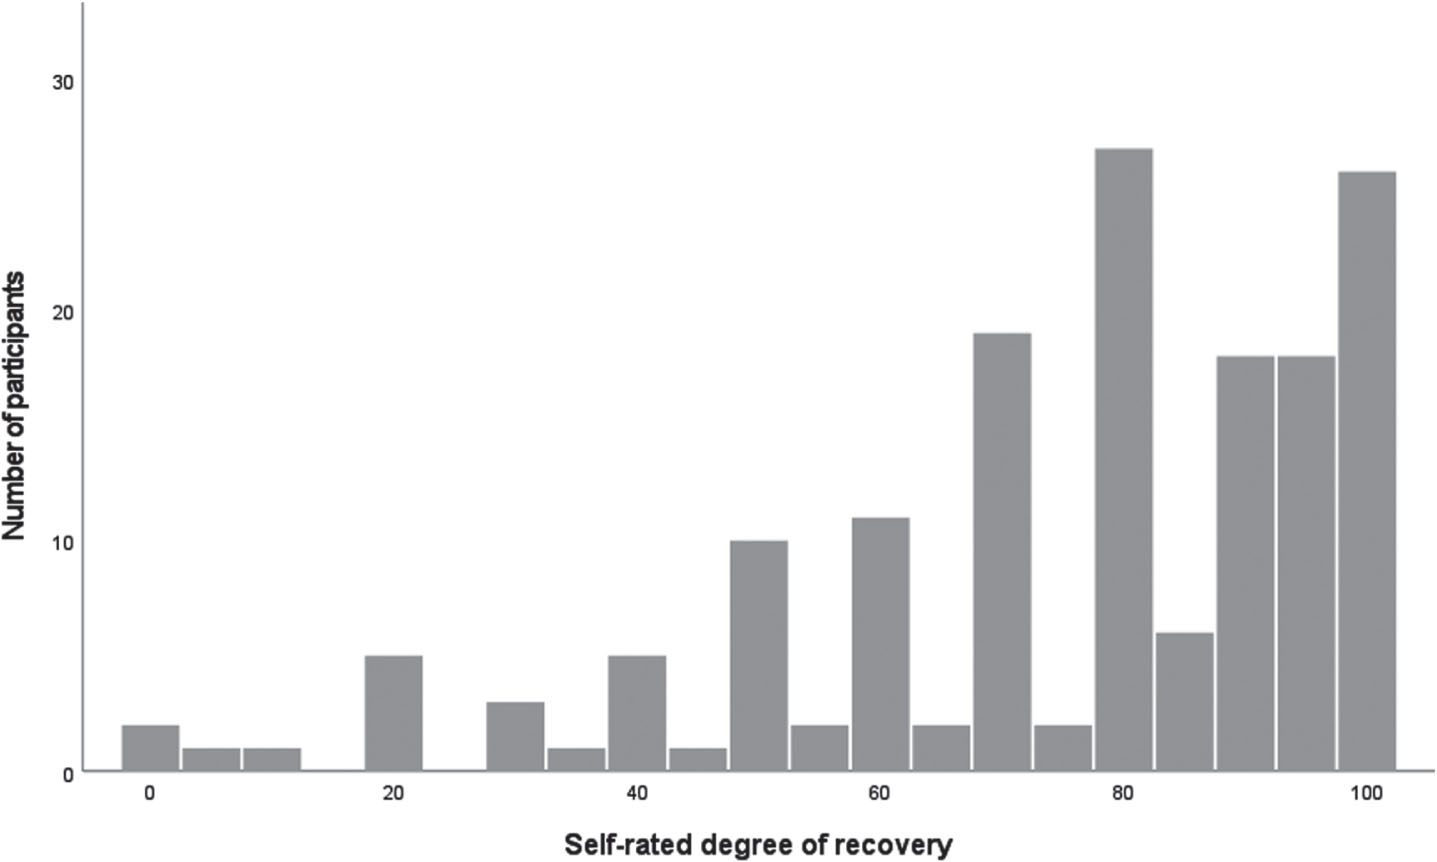 Self-rated degree of recovery (Stroke Impact Scale, SIS 3.0) among 86 men and 74 women in the Life After Stroke In Northern Sweden Study (LASINS).